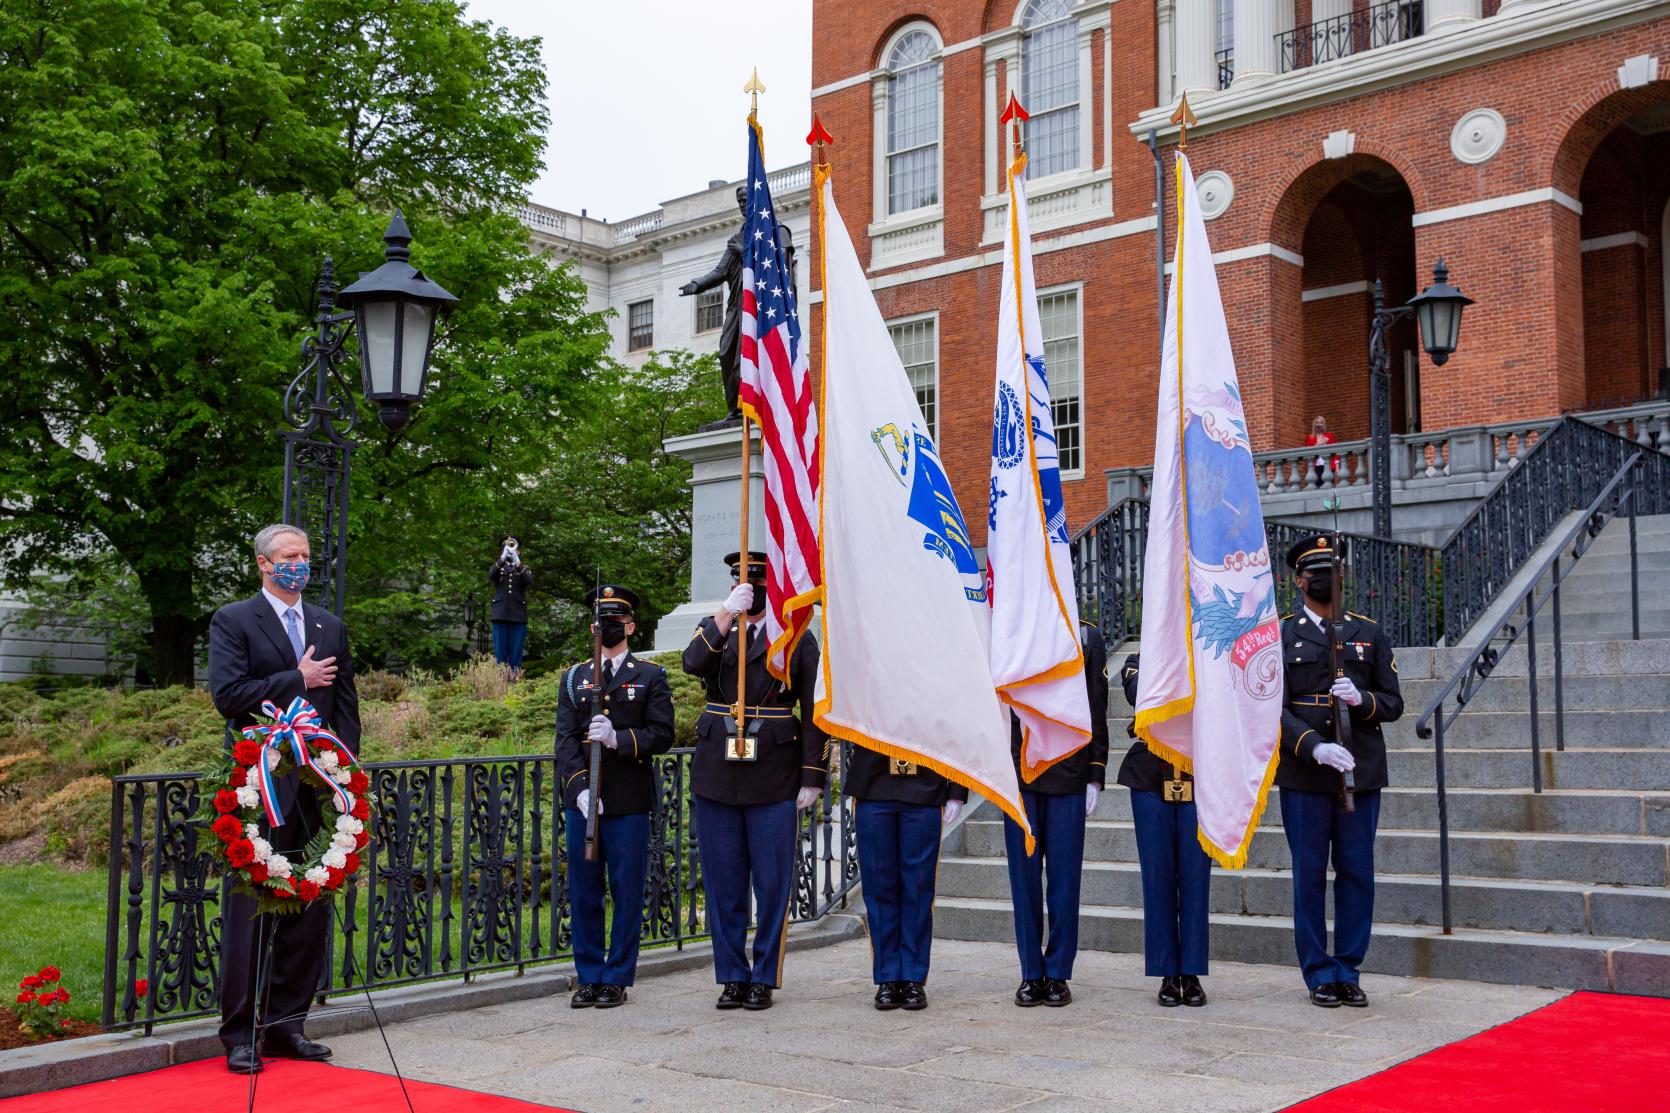 Baker-Polito Administration Recognizes Memorial Day with Virtual Ceremony